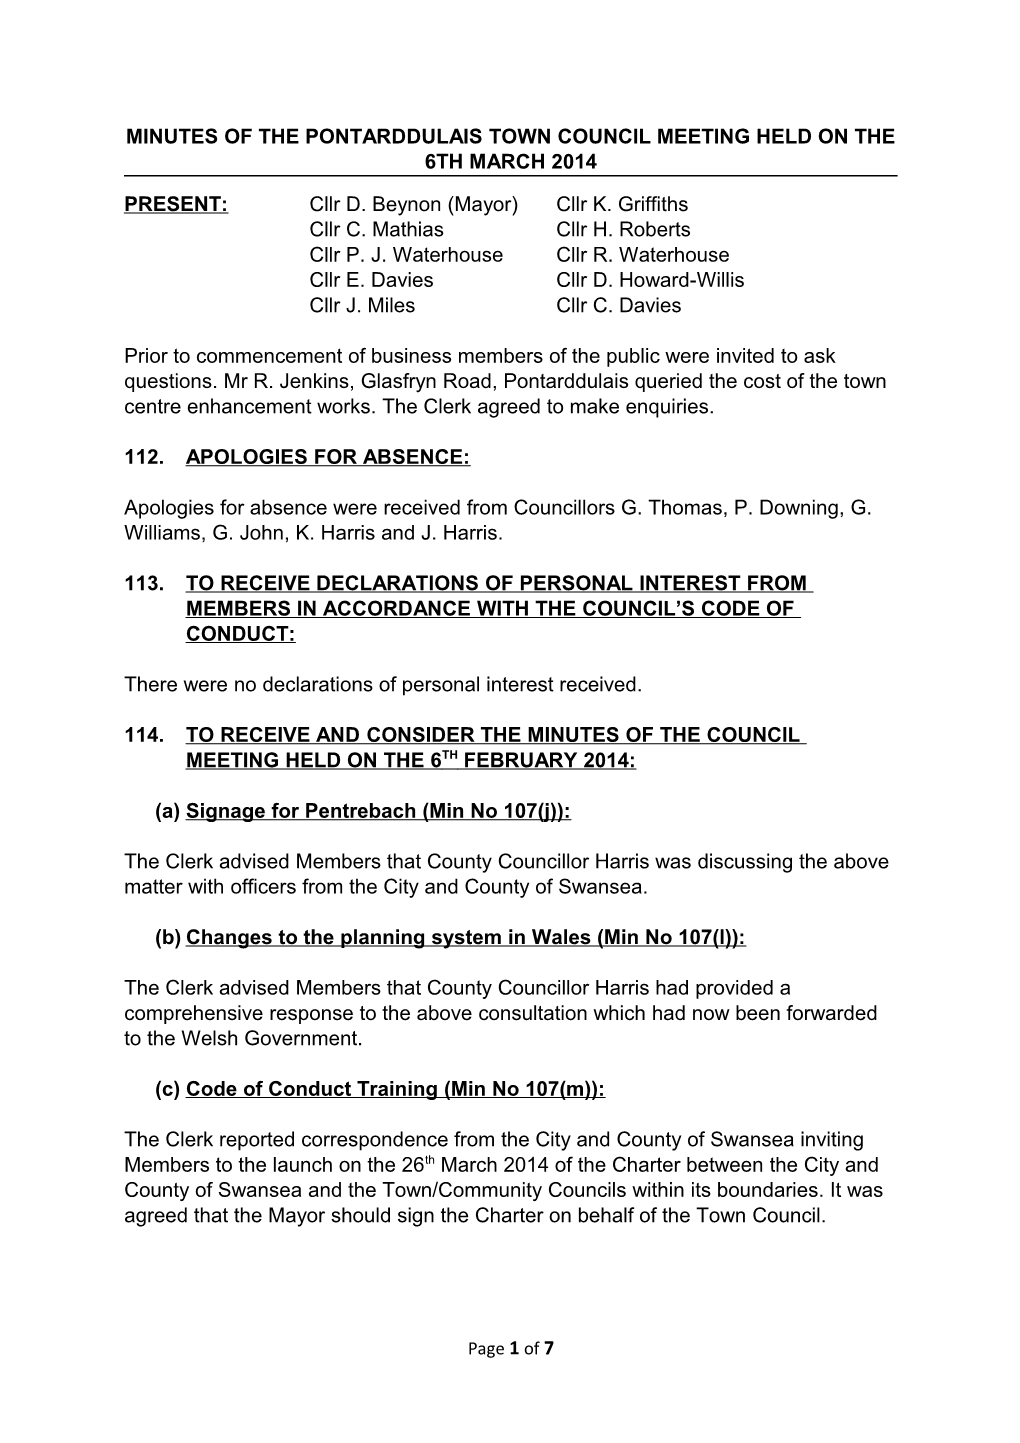 Minutes of the Pontarddulais Town Council Meeting Held on the 6Th March 2014